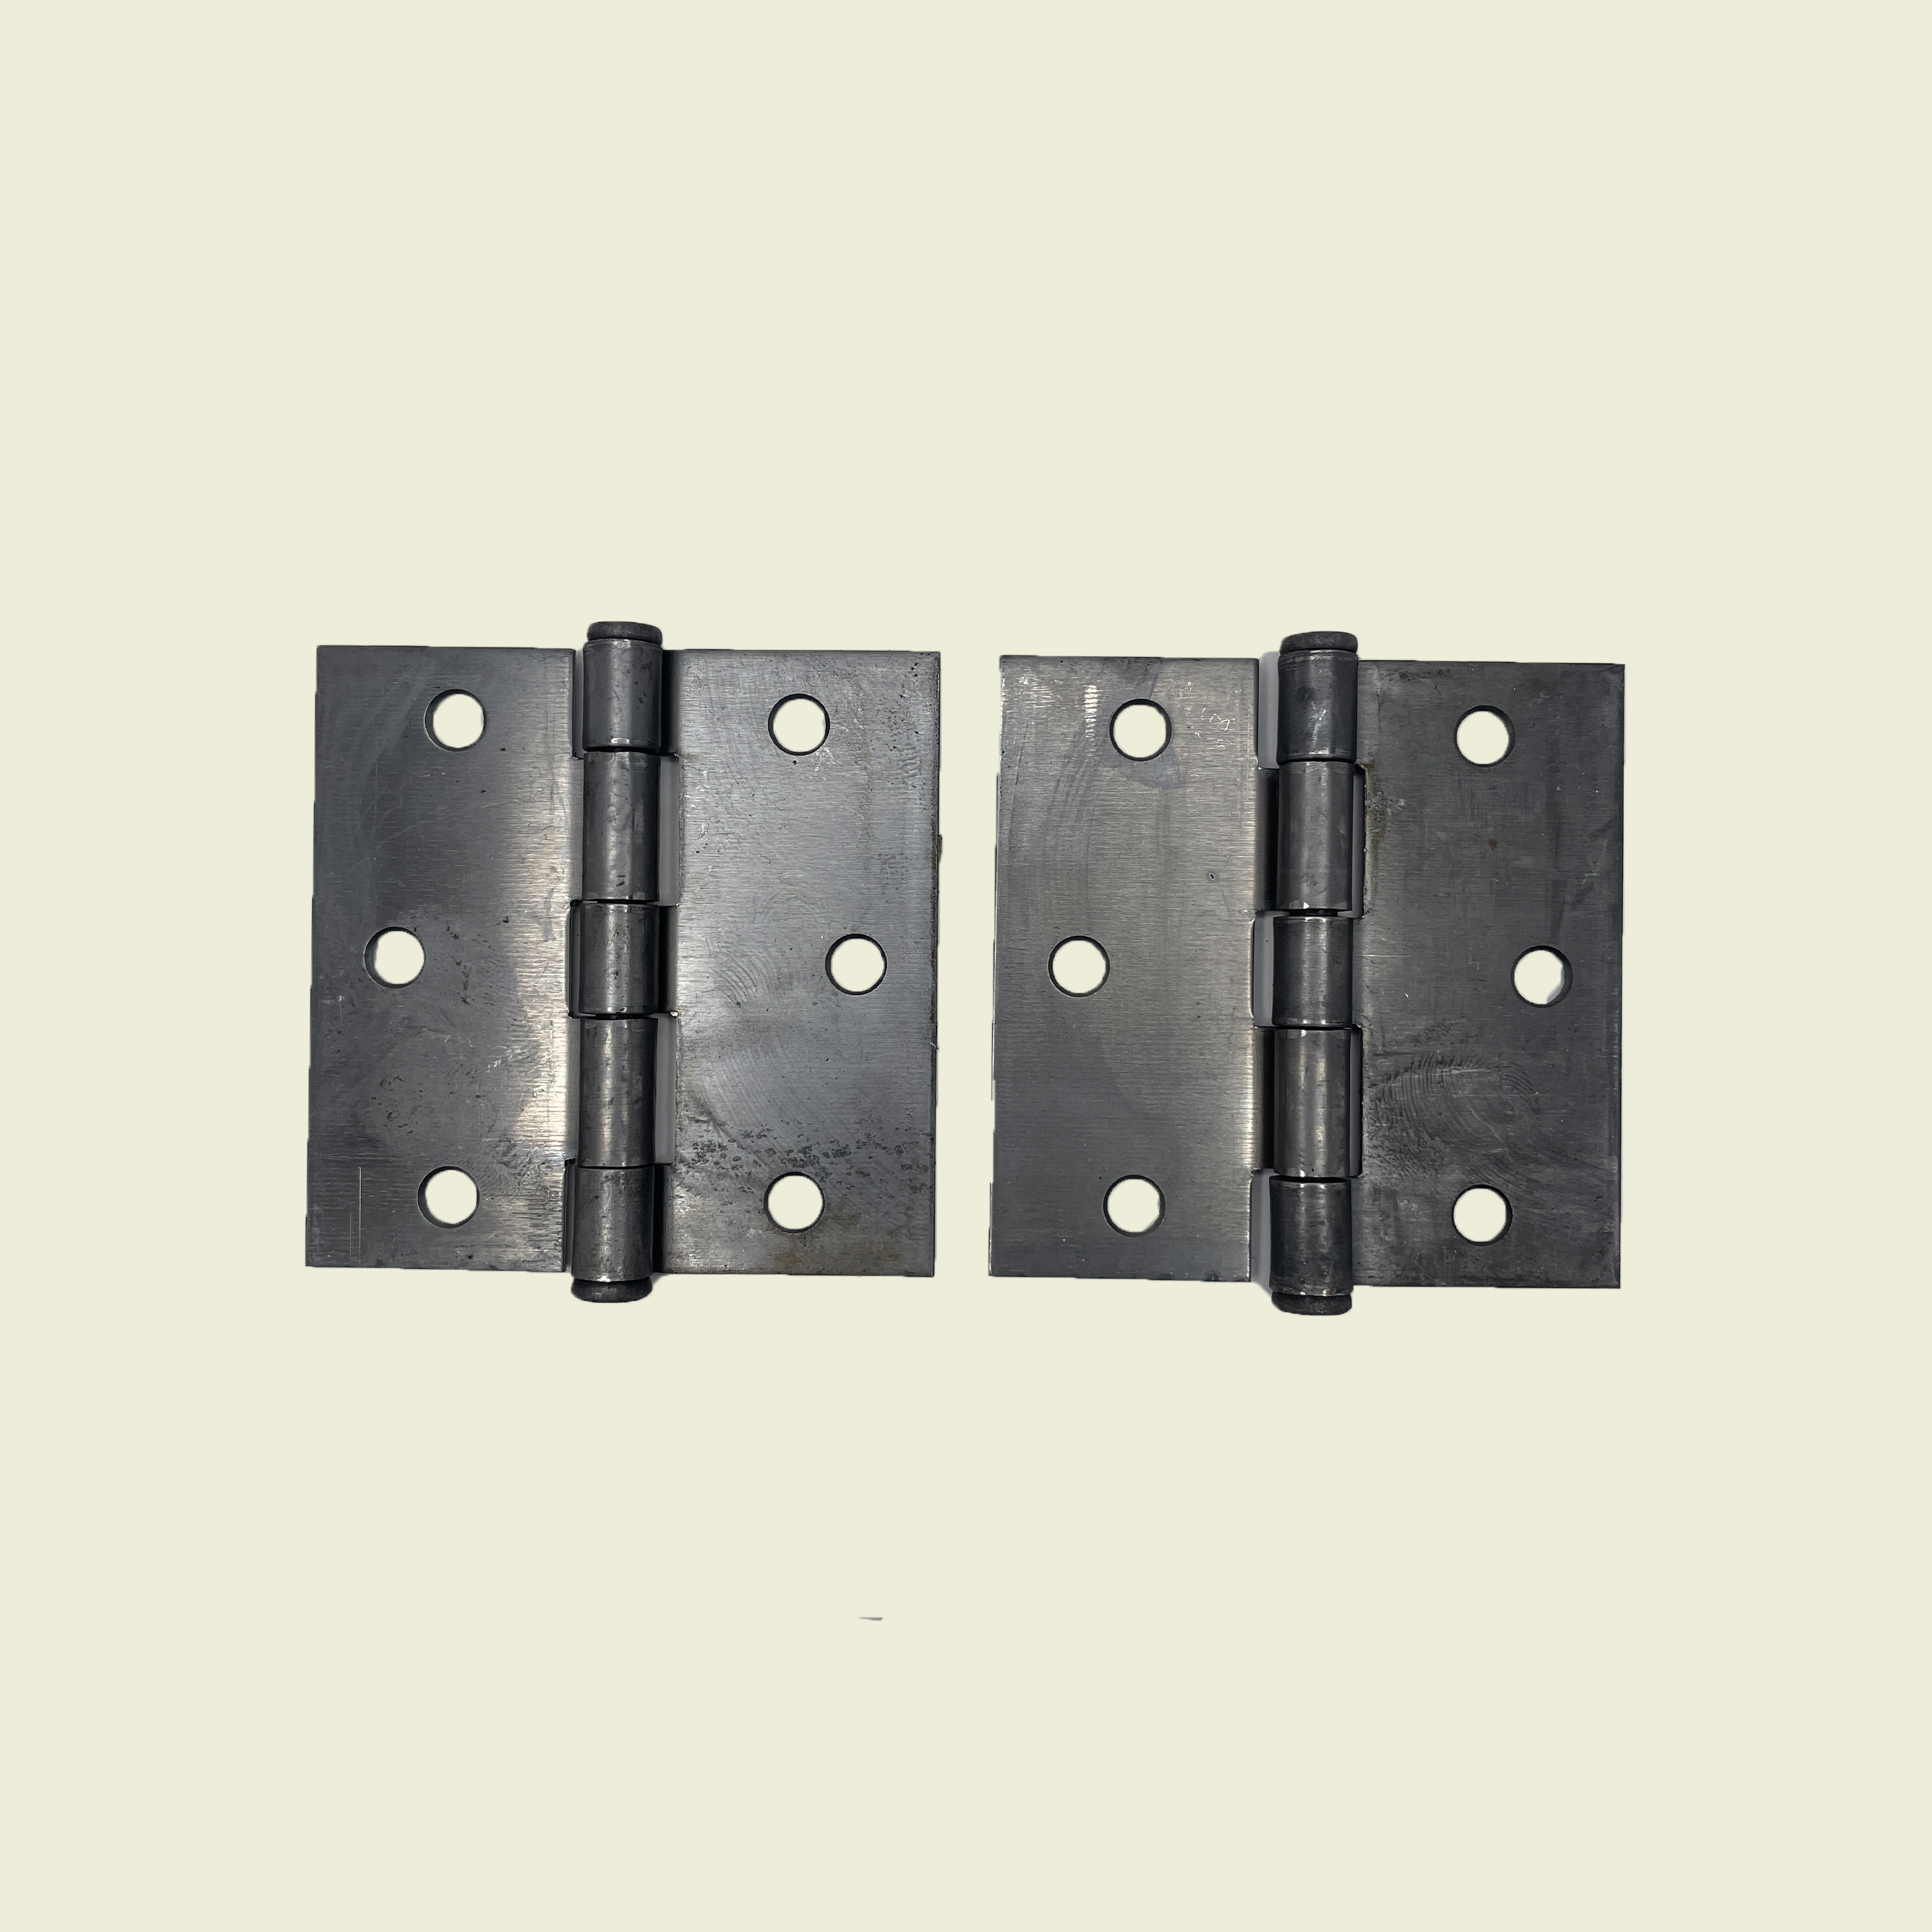 2X Stainless Steel Butterfly Hinges 3 X 1.5 Marine Boat/  Door/Cabinet/Table